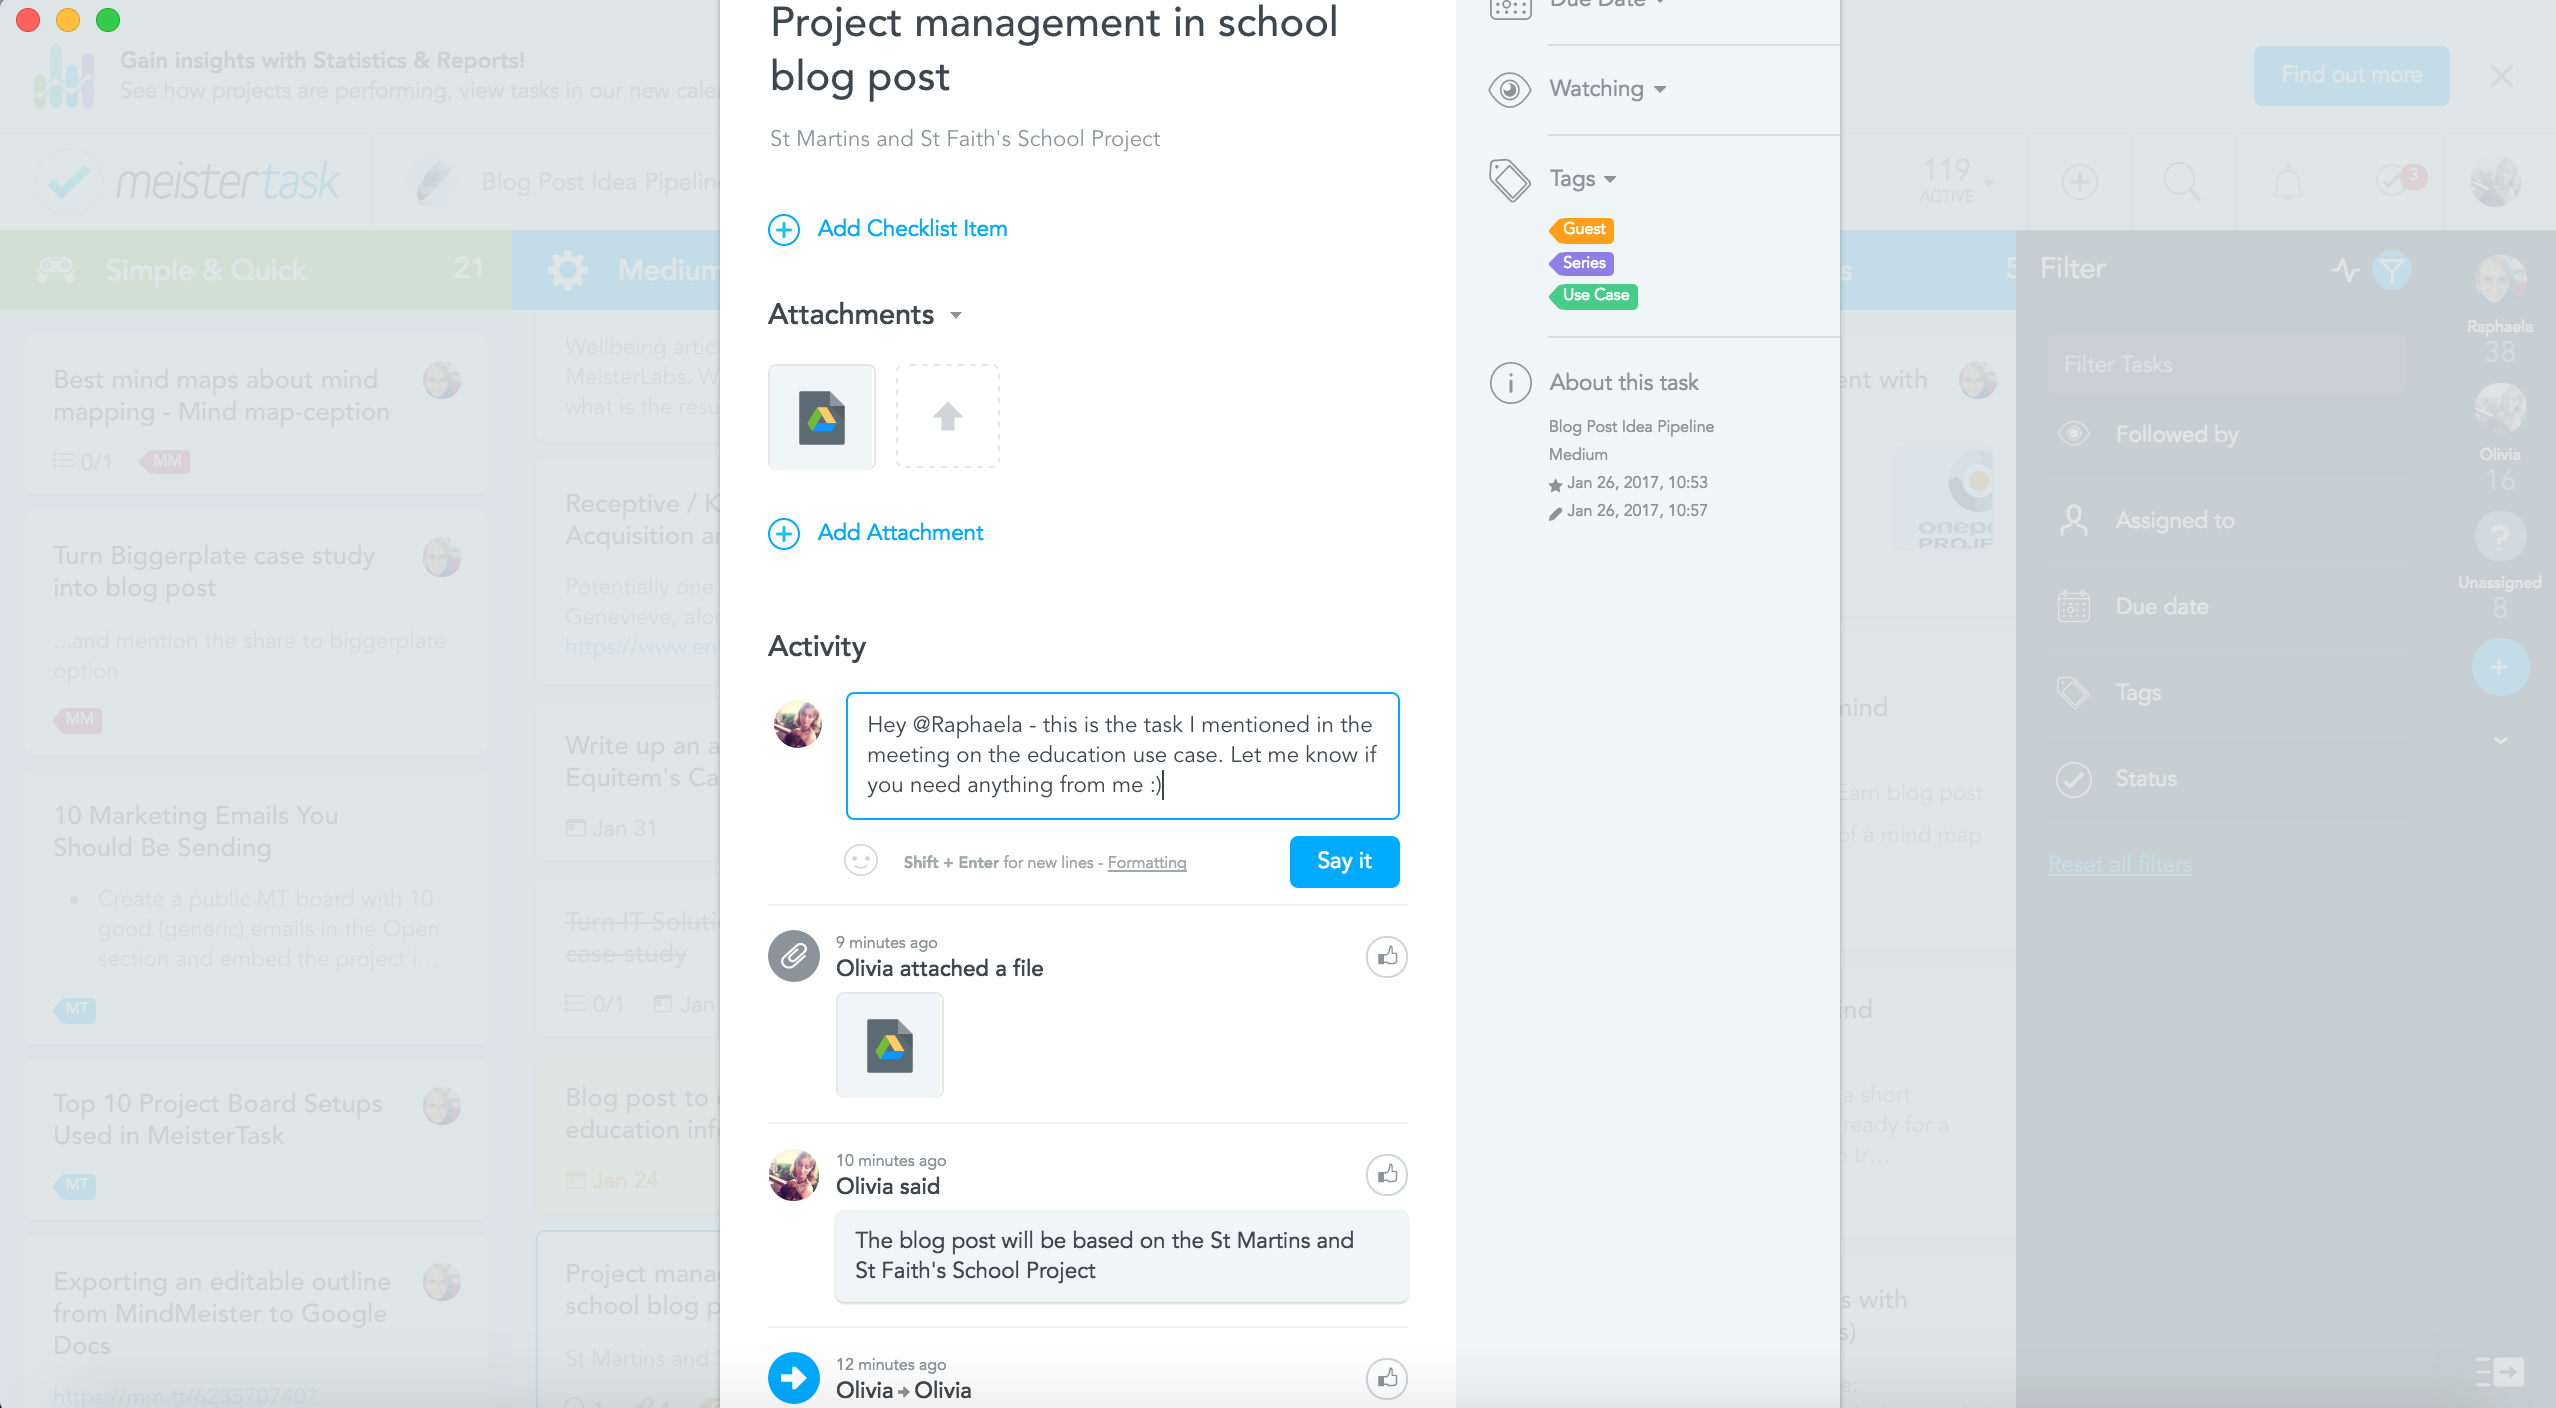 school project management with communication via MeisterTask